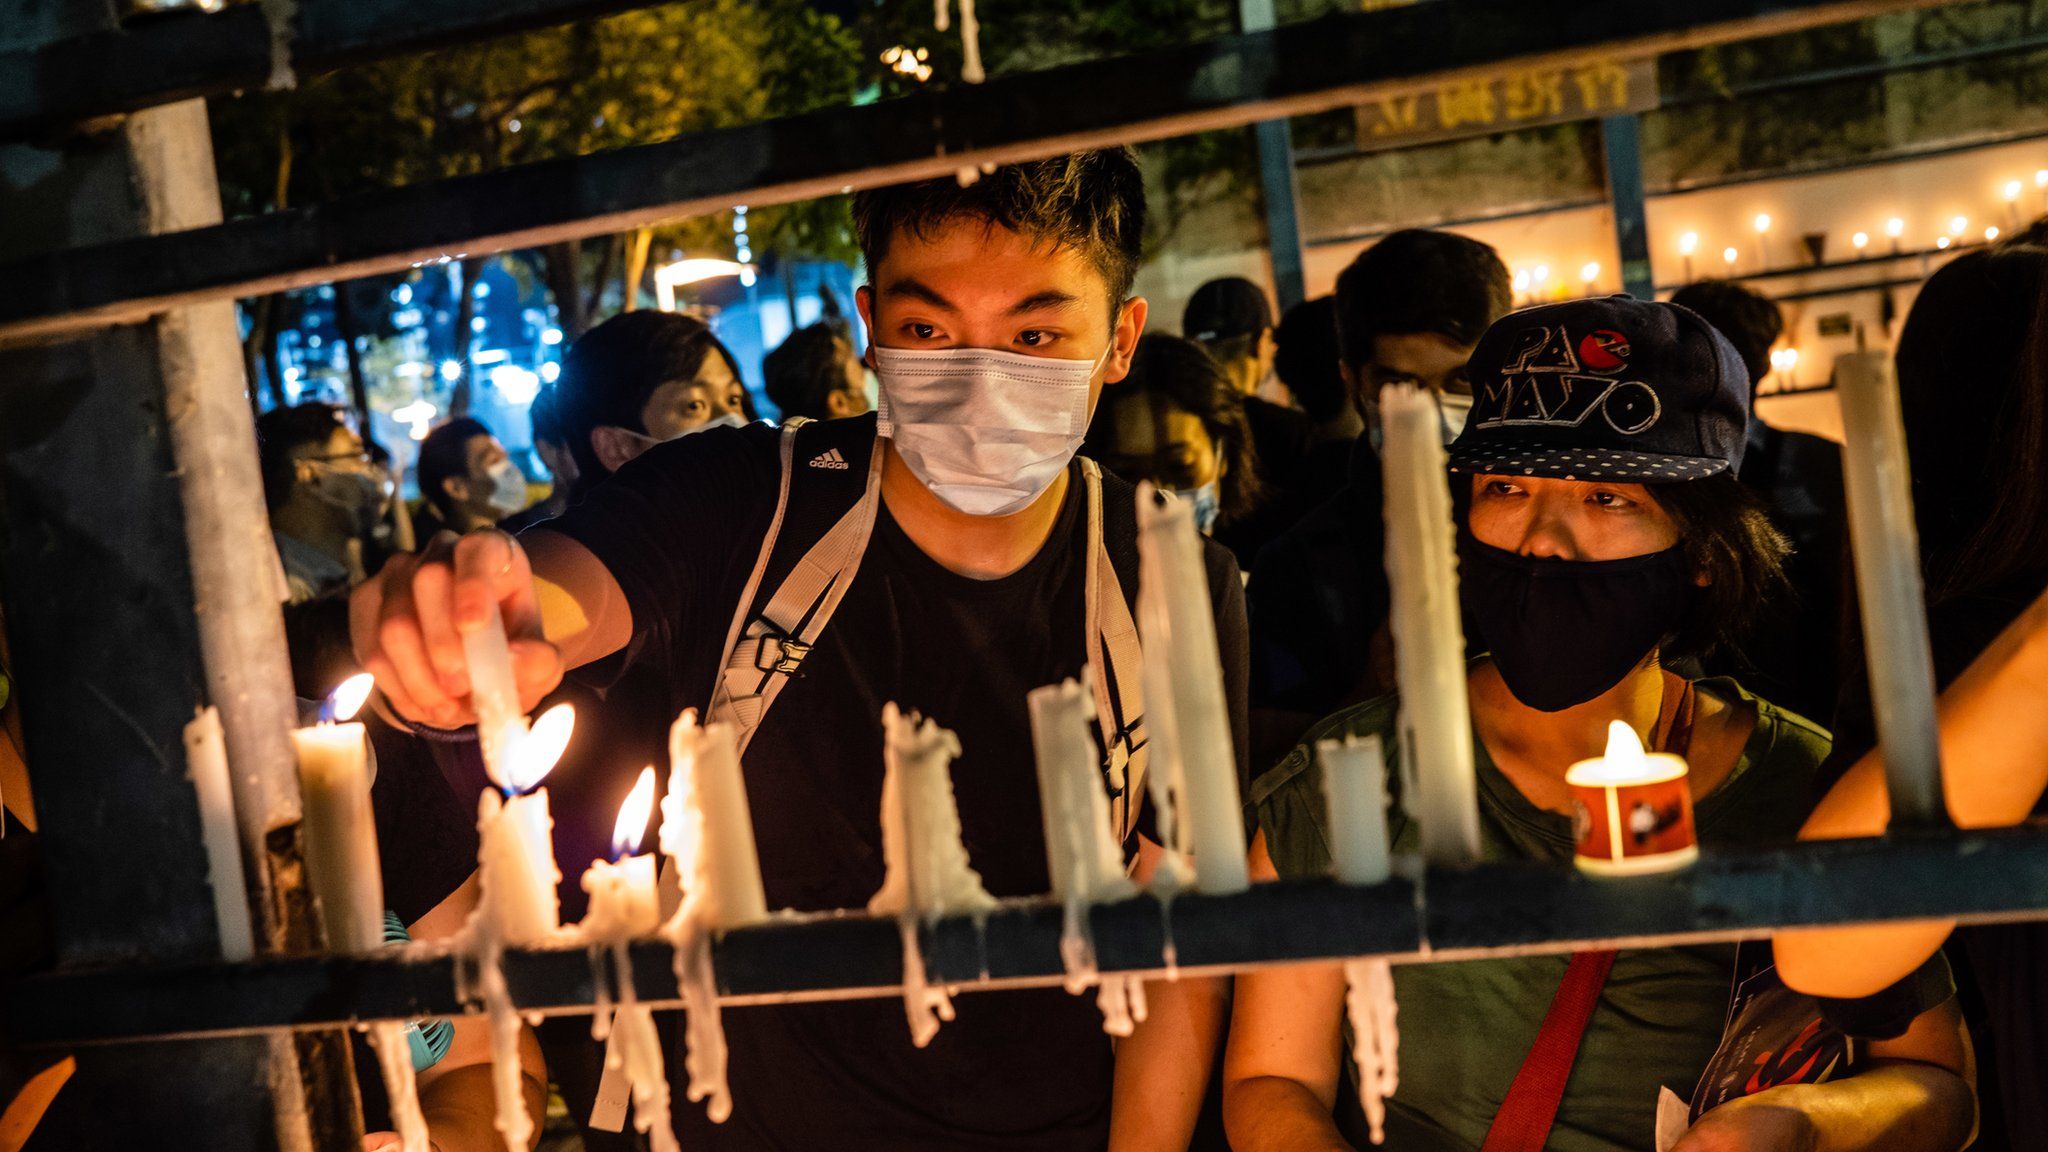 Protesters light candles during the 31st anniversary of the Tiananmen Massacre. Thousands gathered for the annual memorial vigil in Victoria Park to mark the 1989 Tiananmen Square Massacre despite a police ban citing coronavirus social distancing restrictions.